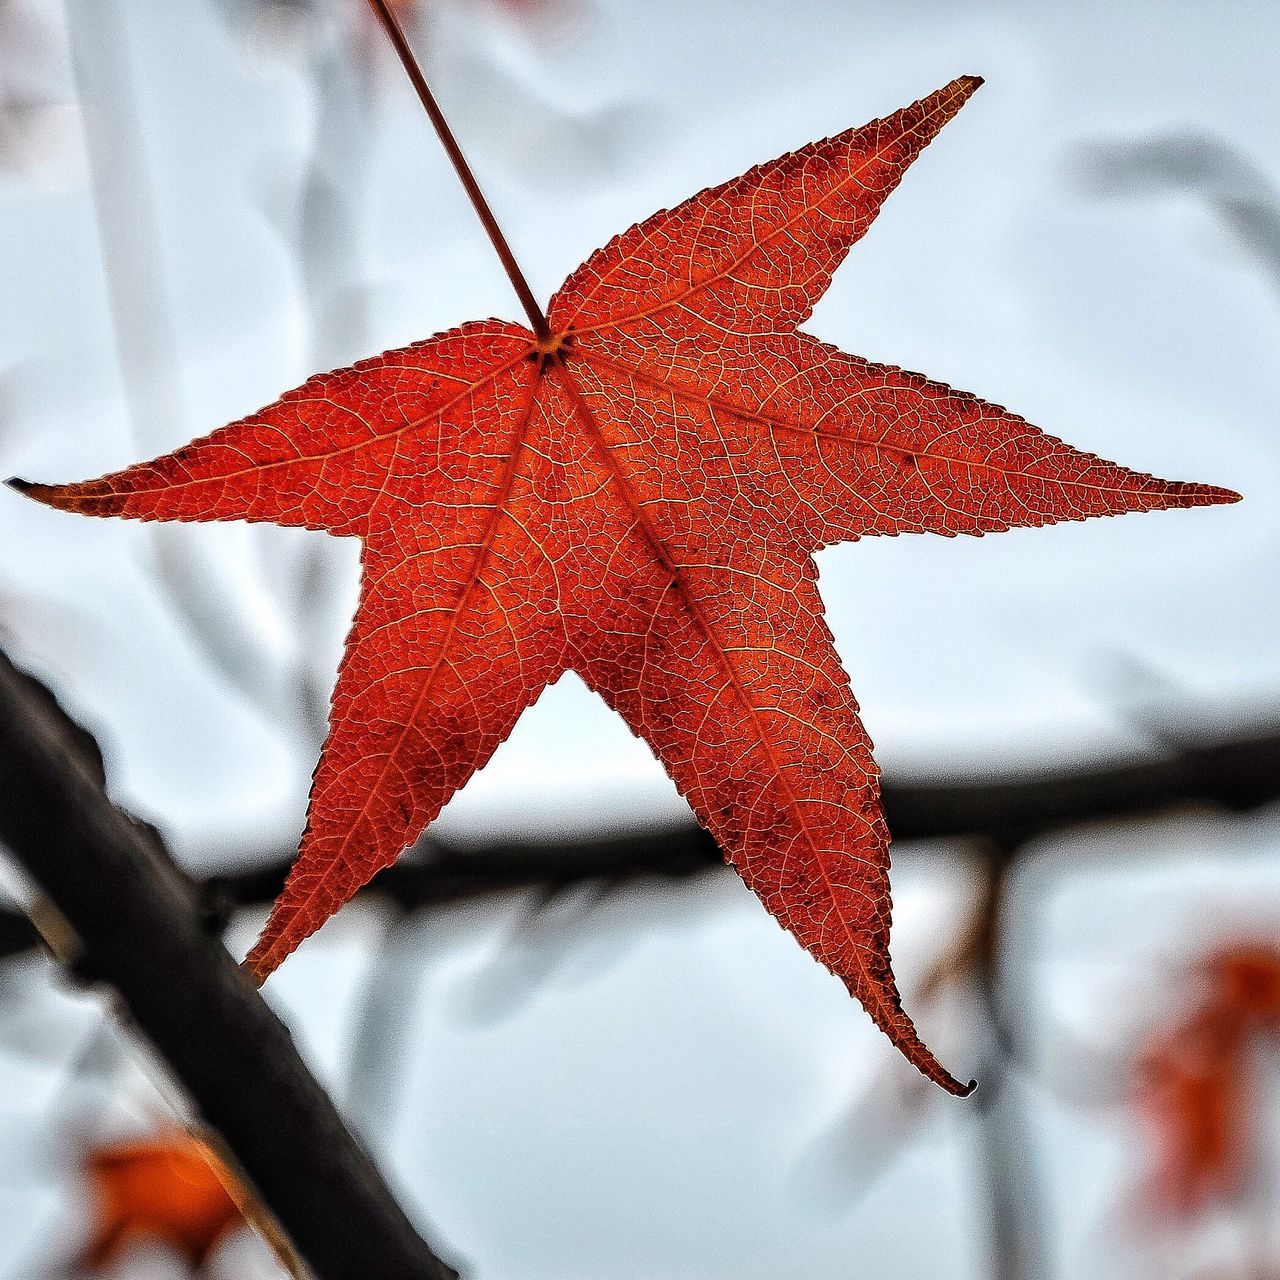 leaf, red, close-up, natural pattern, low angle view, season, dry, leaf vein, autumn, damaged, change, focus on foreground, maple leaf, natural condition, day, nature, star shape, outdoors, sky, leaves, beauty in nature, fragility